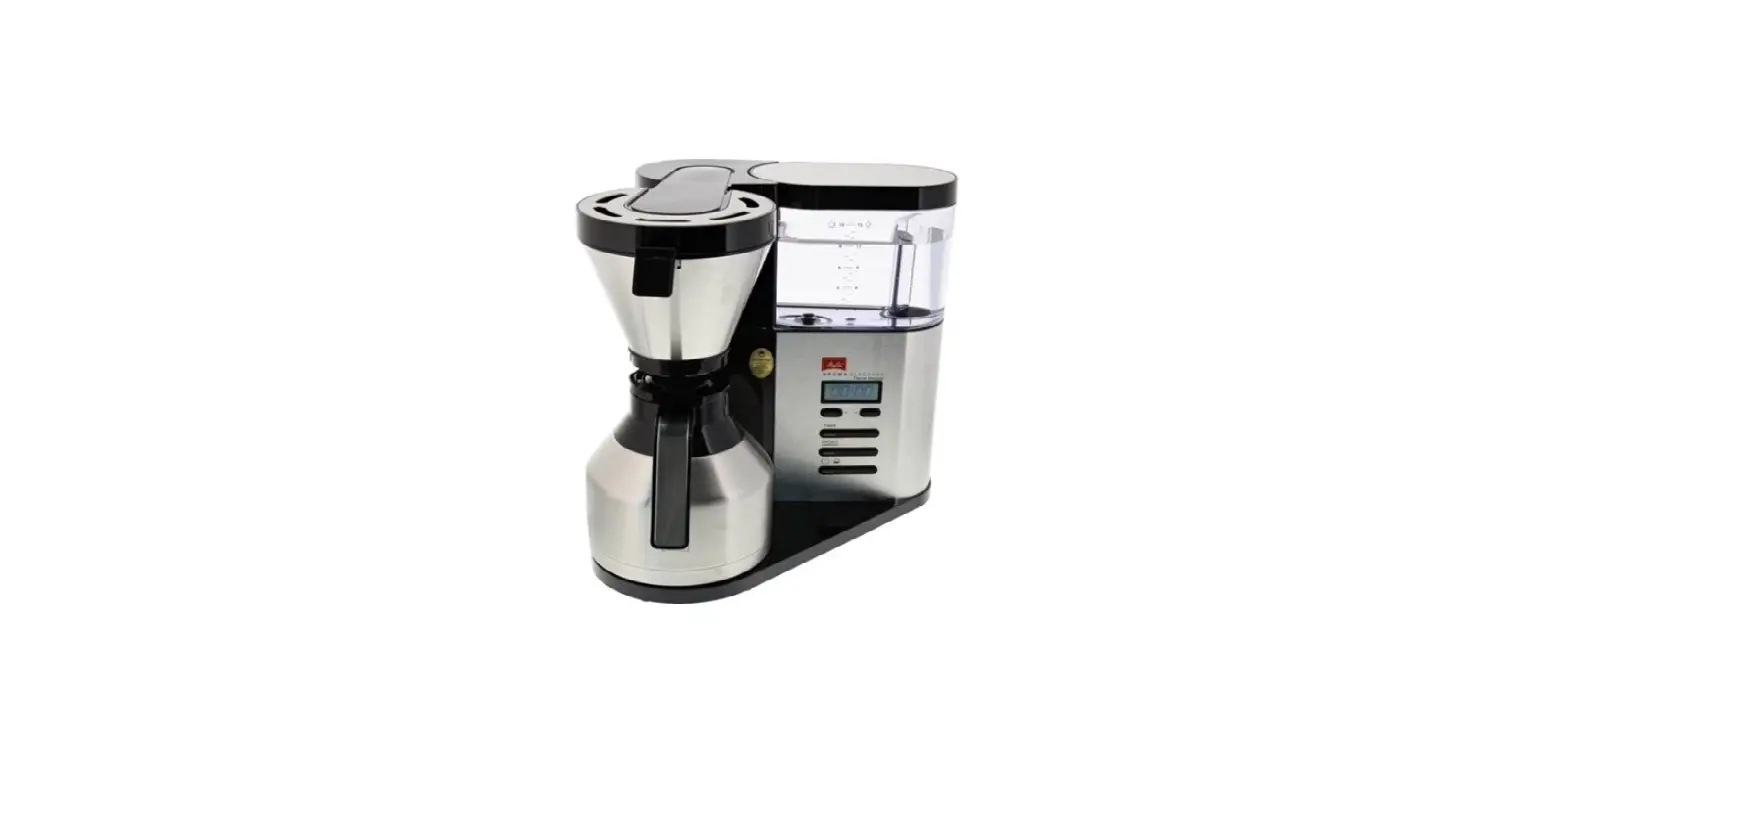 AromaElegance Therm DeLuxe Filter Coffee Machine